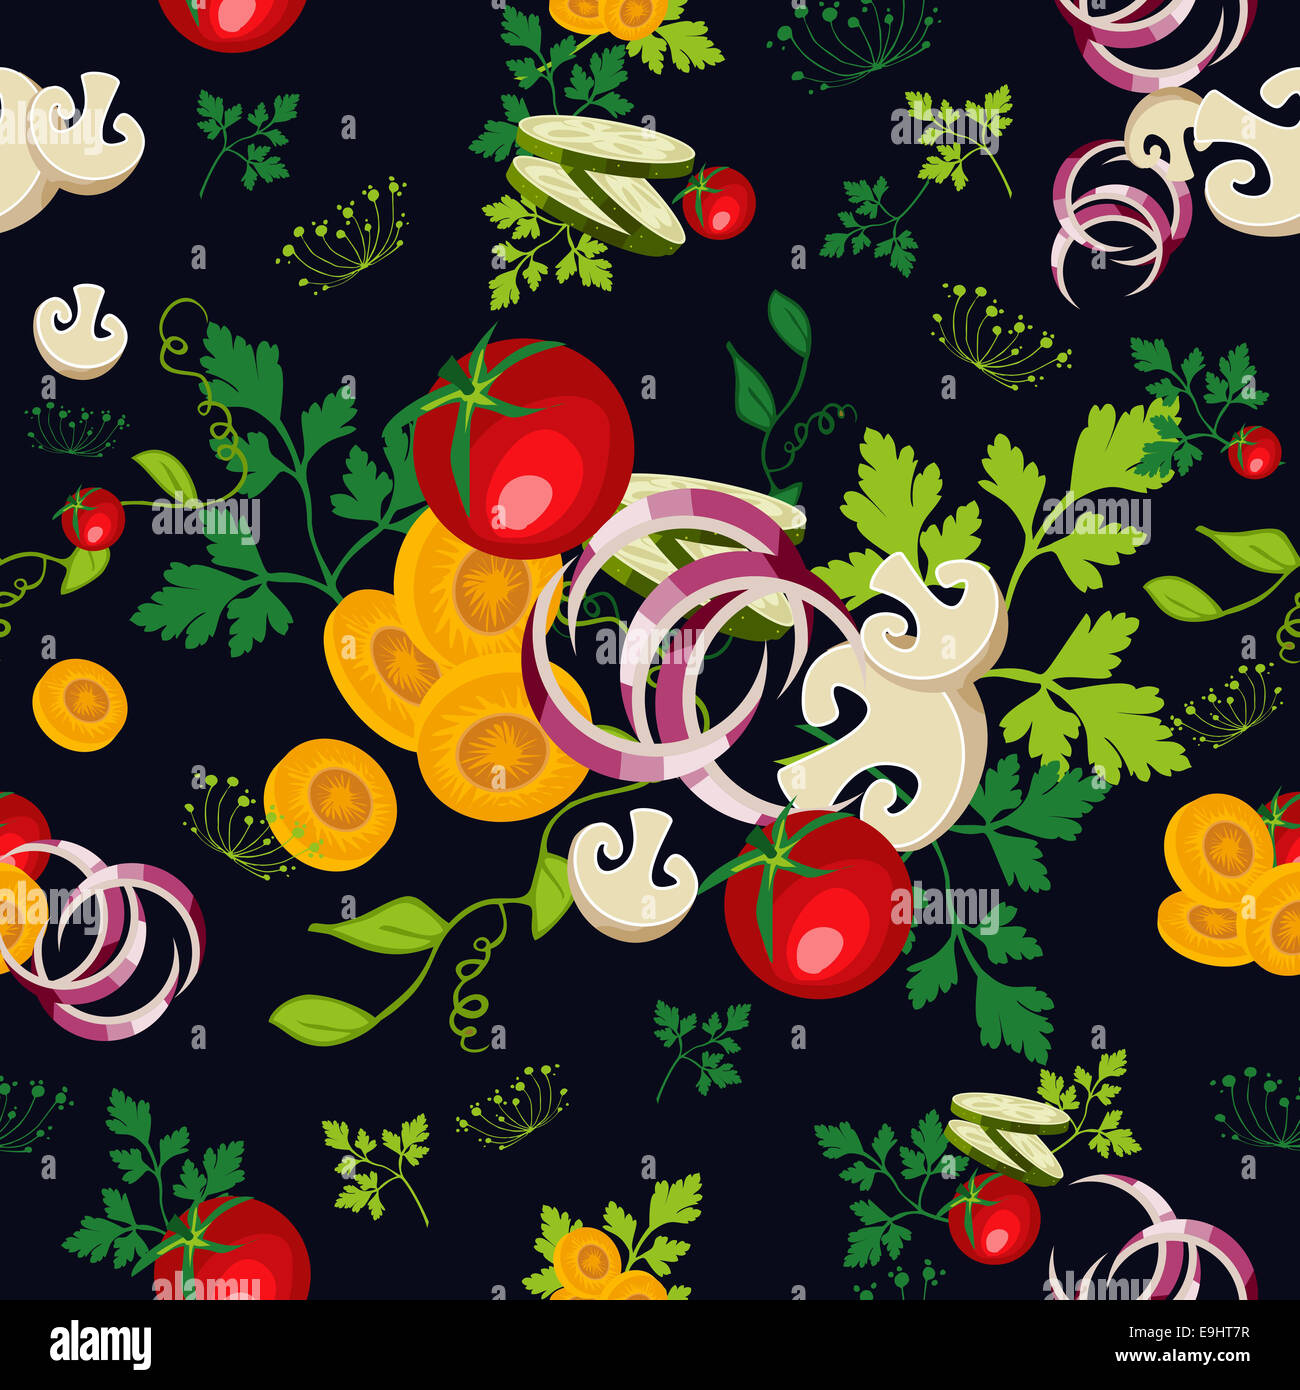 Healthy food seamless pattern design for vegetarian restaurant menu cover or salad bar. EPS10 vector file in layers for easy edi Stock Photo